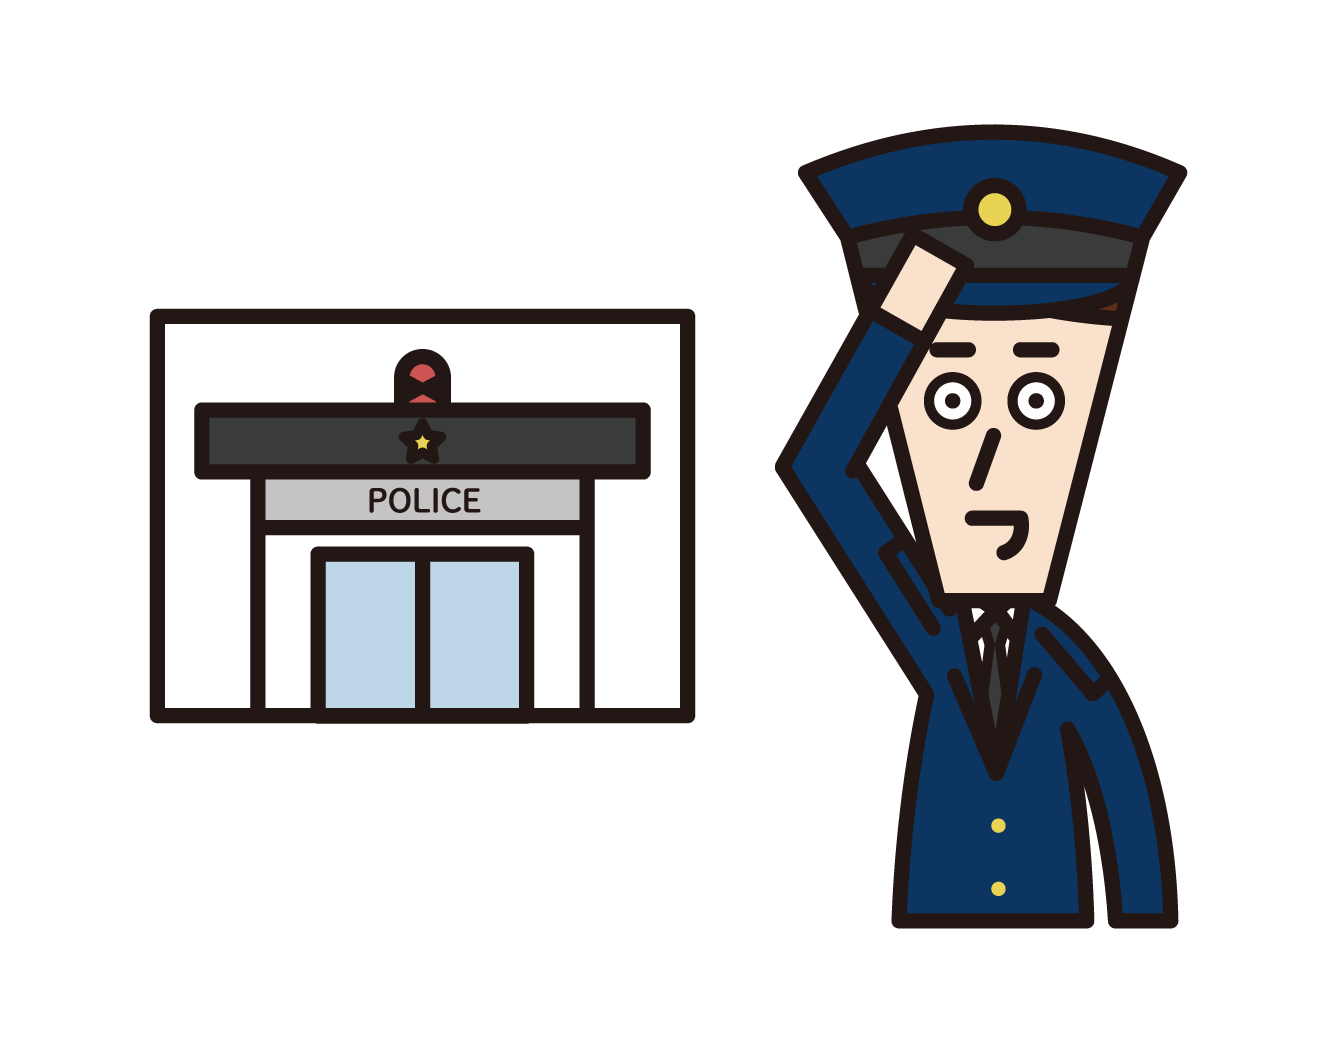 Illustration of a police officer (male) saluteing in front of a police box